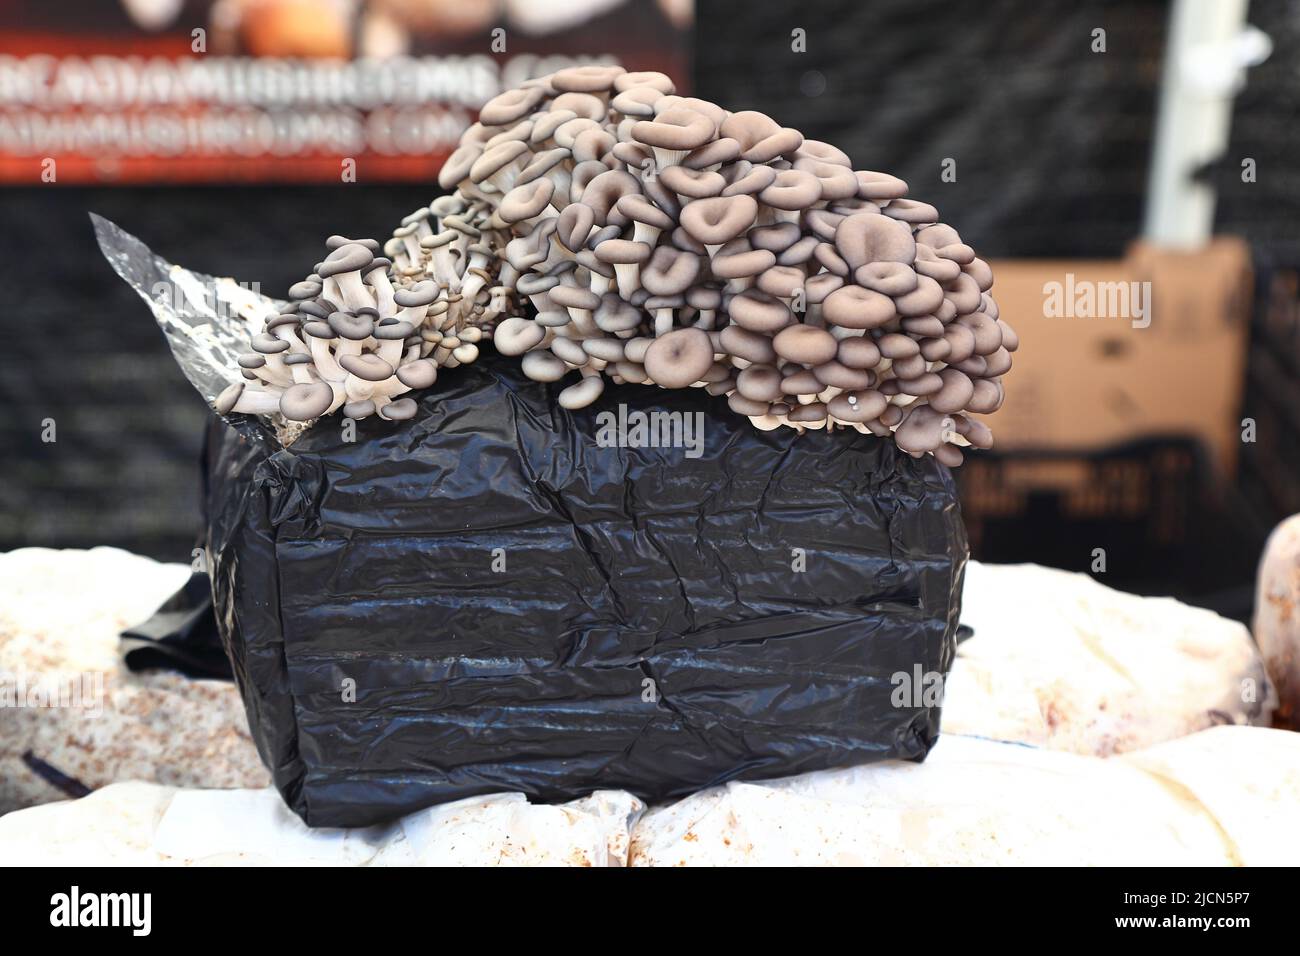 Oyster Mushroom Grow Kit being sold at a farmer's market Stock Photo